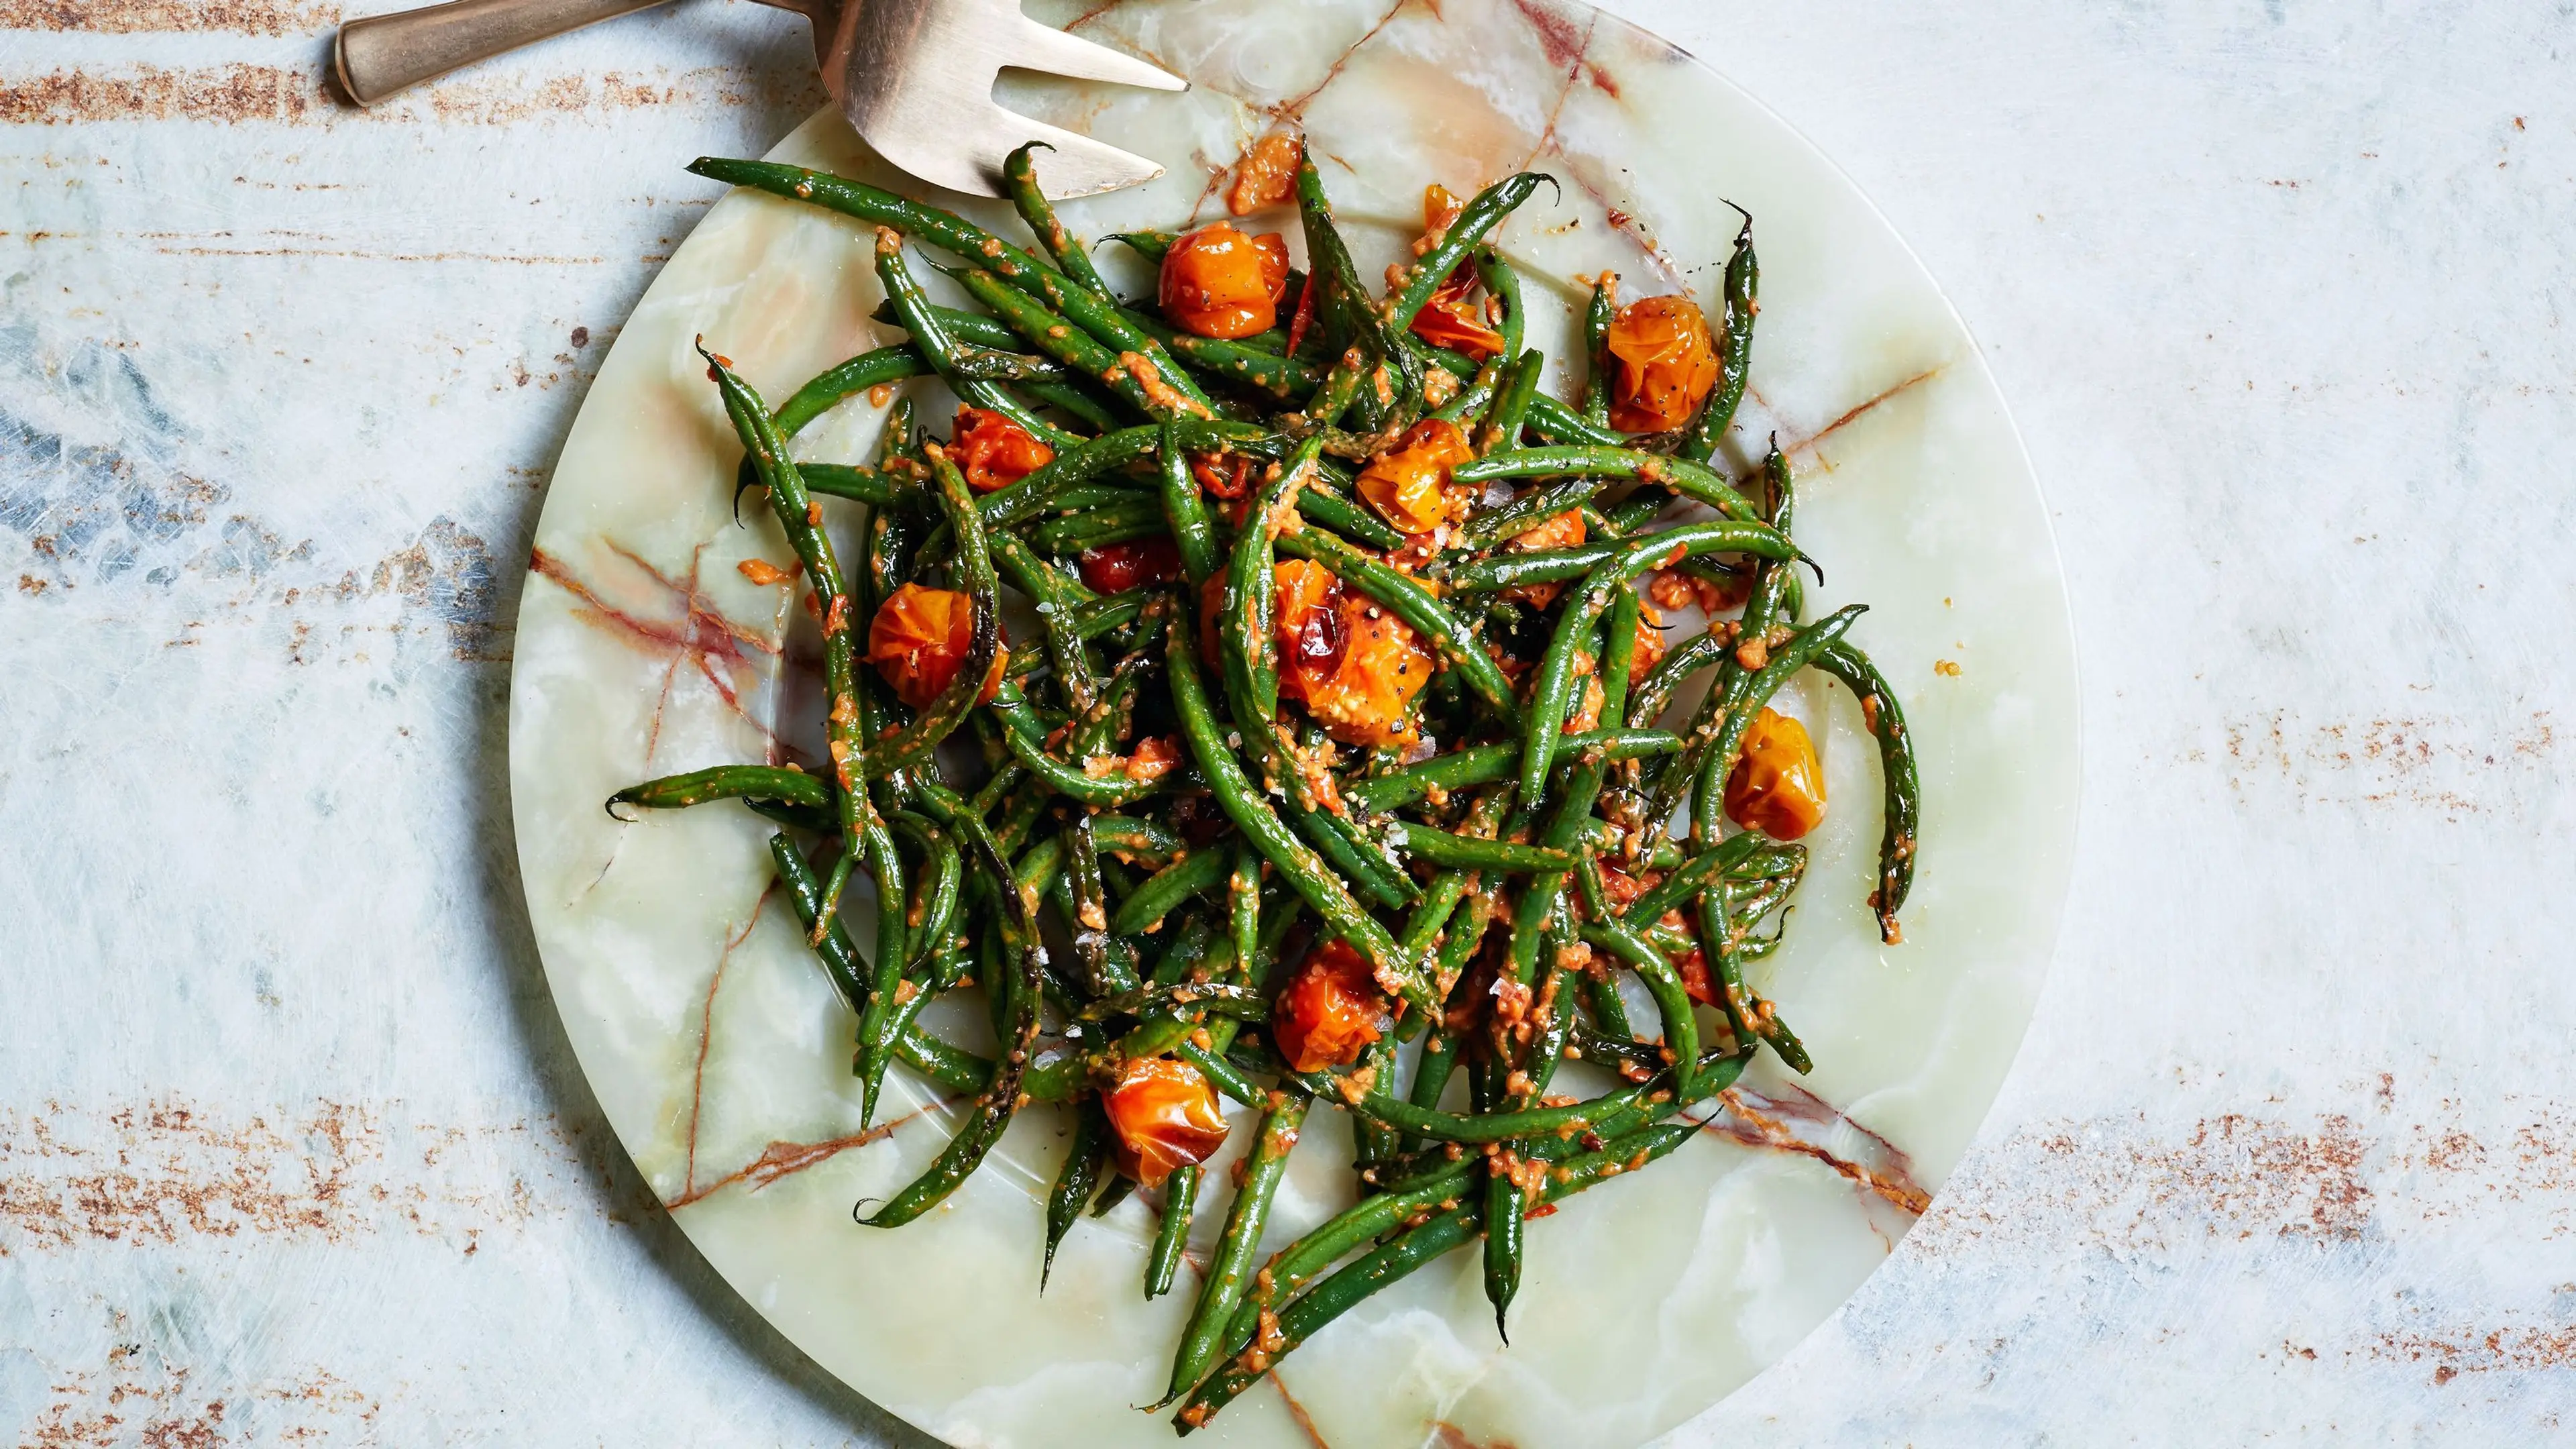 Blistered Green Beans With Tomato-Almond Pesto